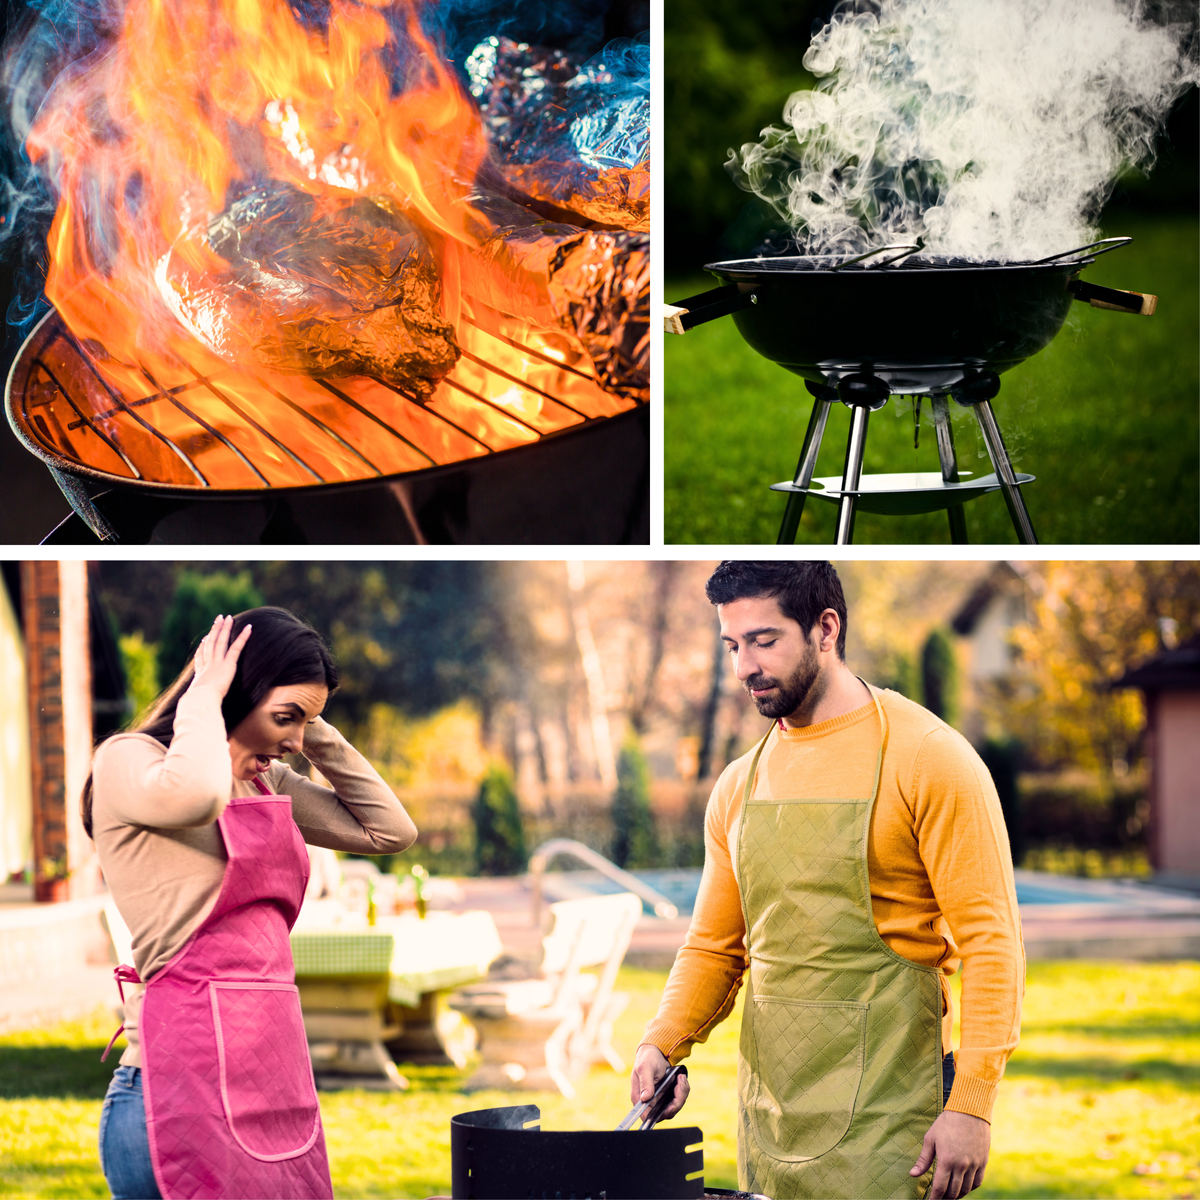 Grill on fire, smoky grill, couple dismayed over grill failure